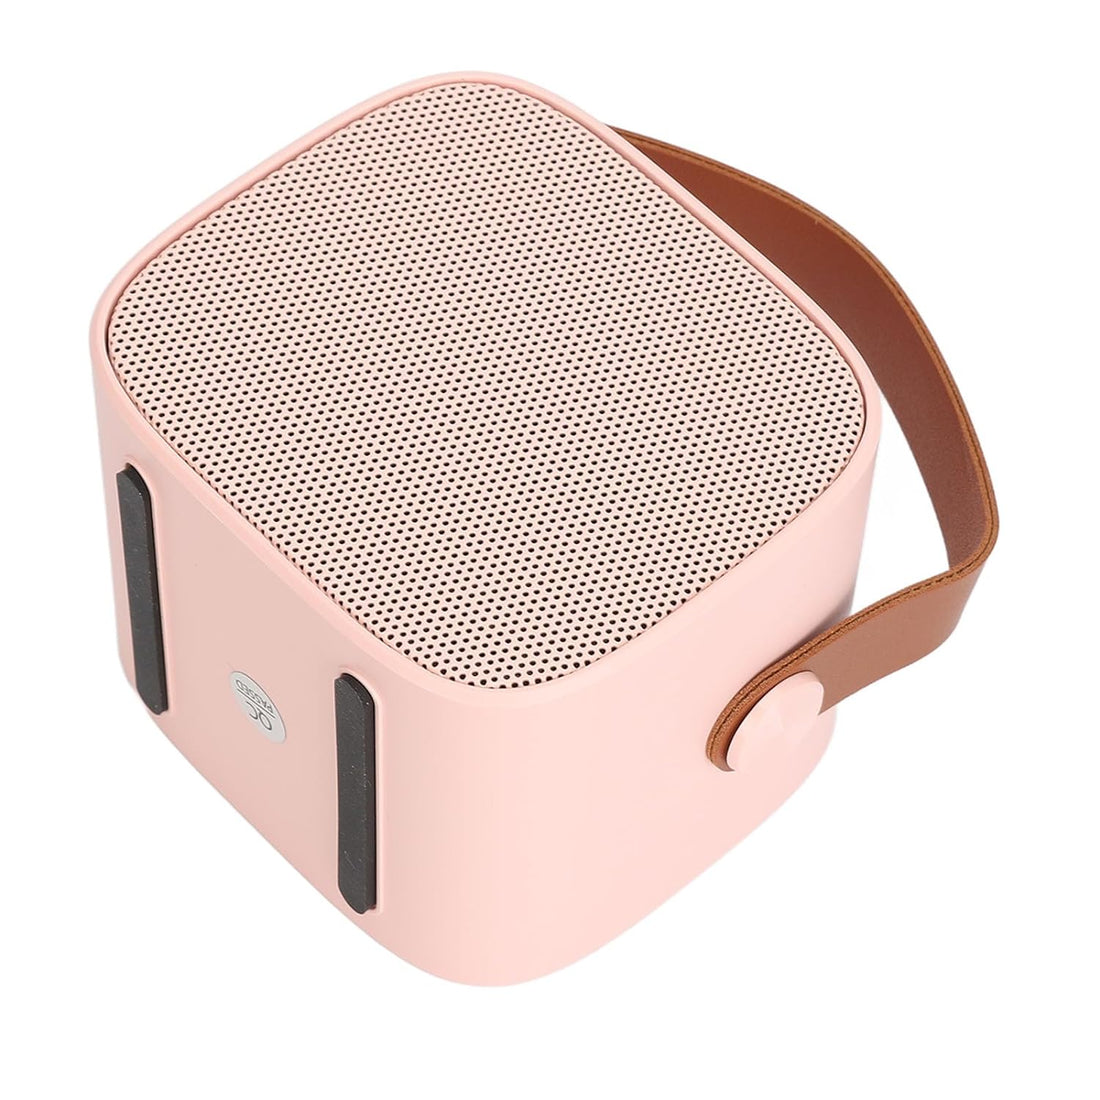 Tgoon Mini Karaoke Machine, Multifunctional Portable Speaker with Pink Voice HiFi Speaker with 2 Wireless Microphones for Children for Parties